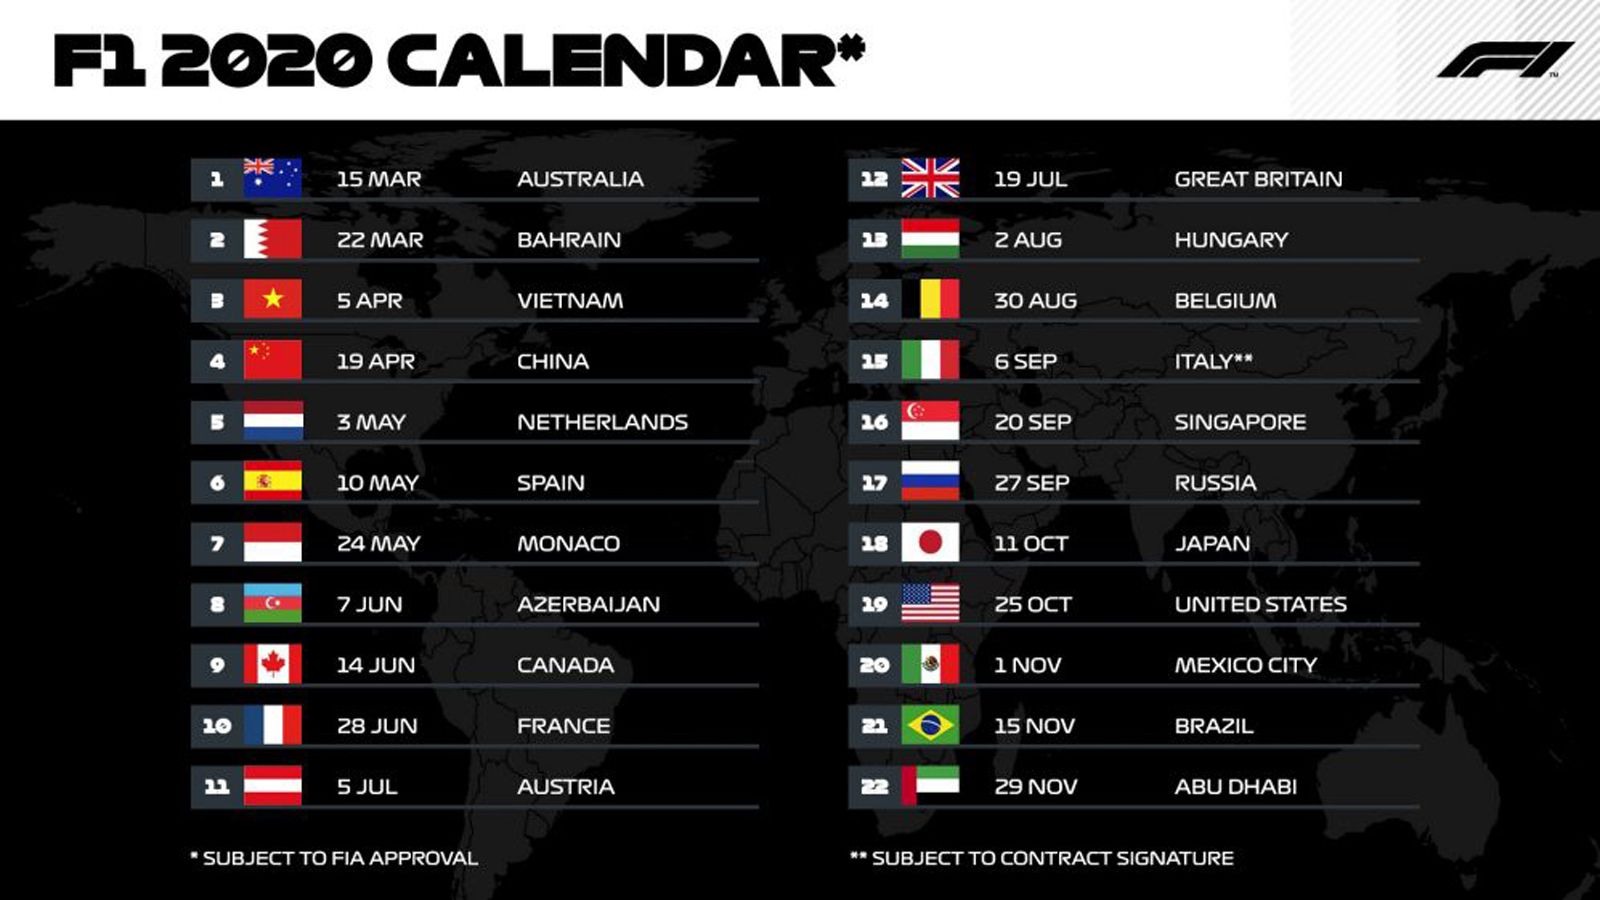 F1 Schedule Released Record 22 Races Make The Final Calendar